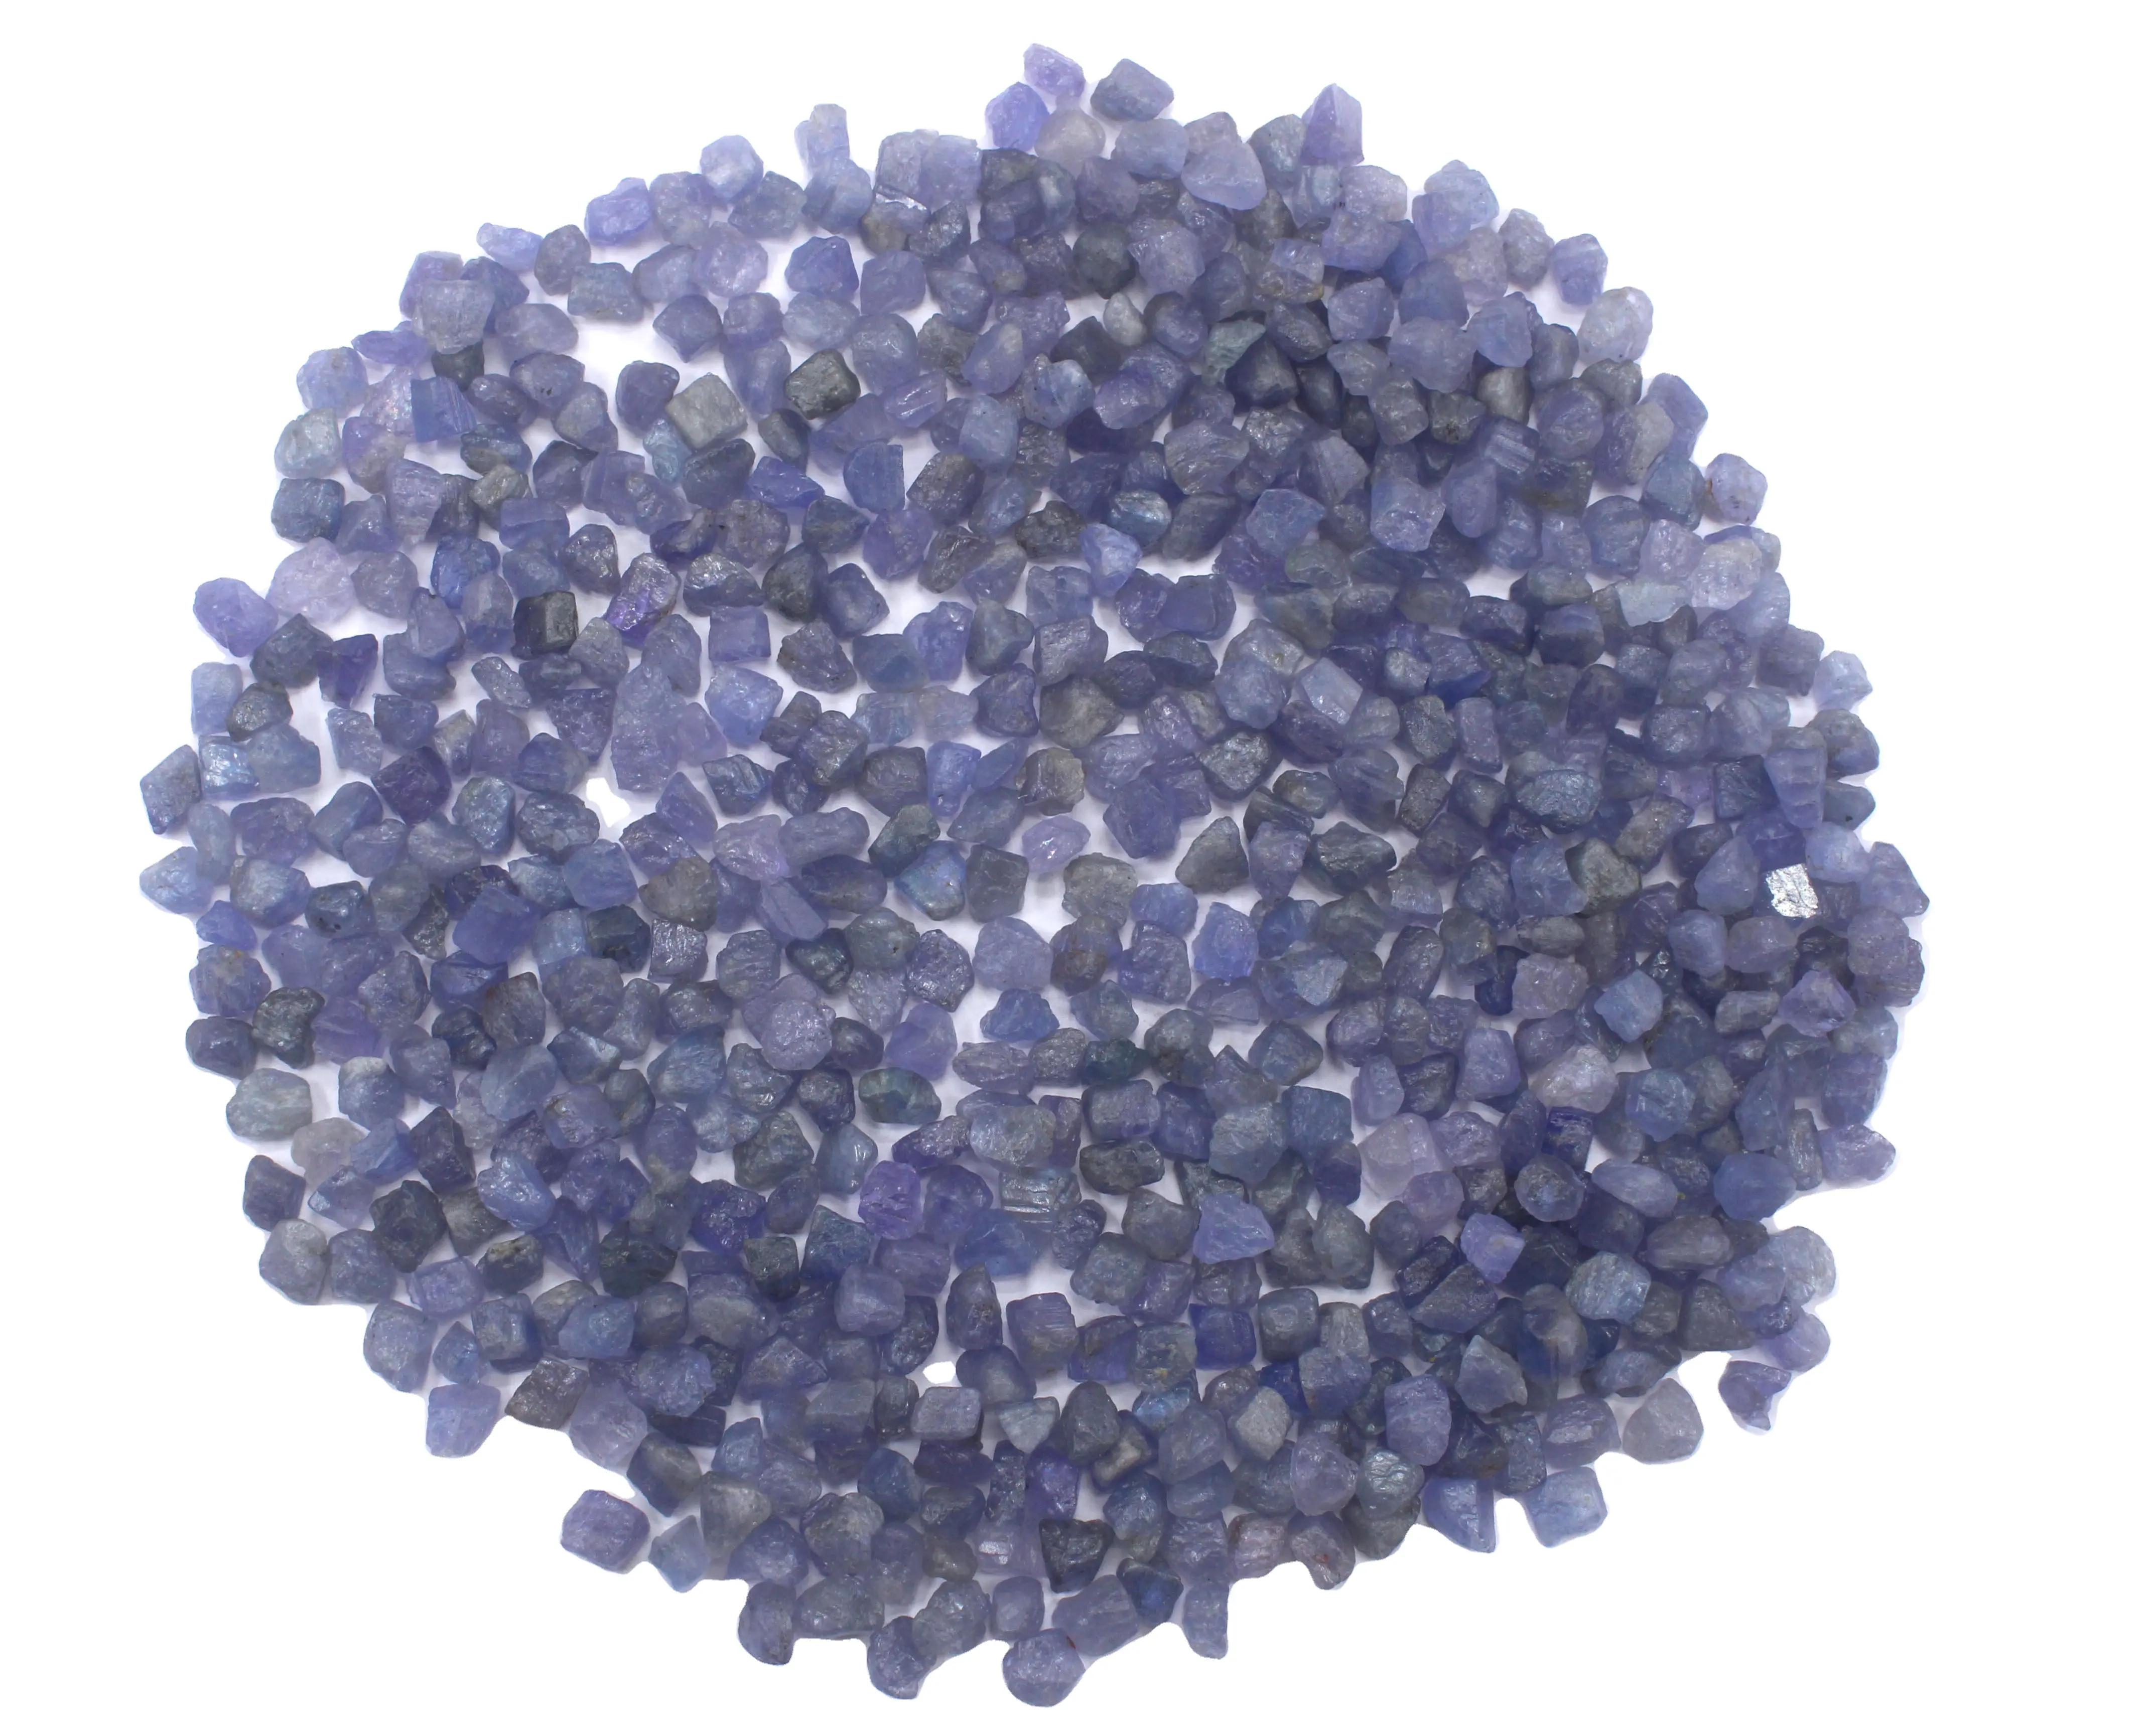 50 Pieces Violet Natural Tanzanite 4-6 MM Raw, Untreated Tiny Rough Gemstone Making Jewelry Indian Wholesaler